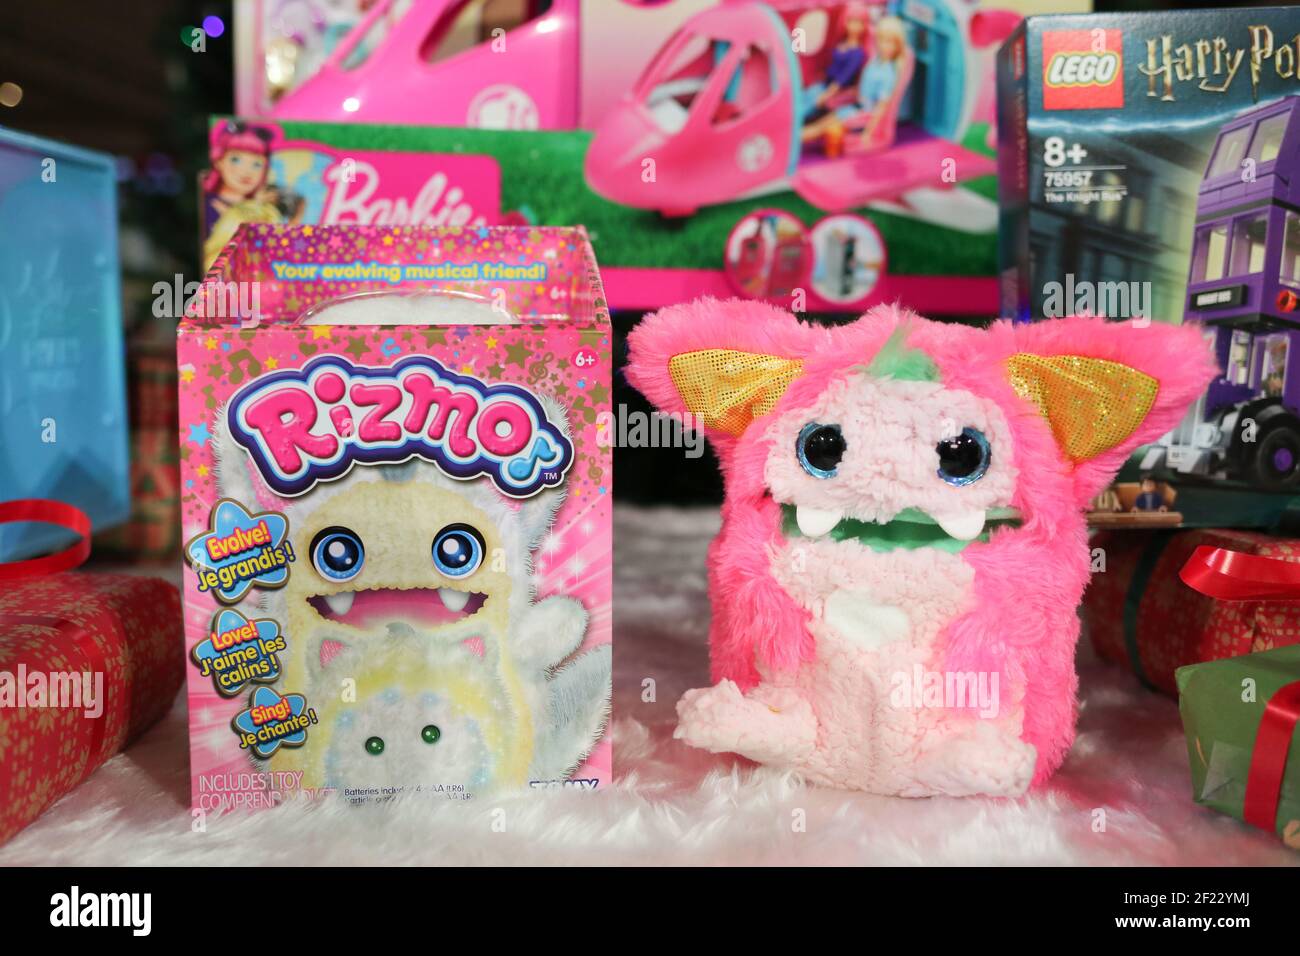 A Rizmo toy, one of the Top 12 toys this Christmas unveiled at Dreamtoys 2019 in London. The list, issued by the Toy Retailers Association predicts what will be hot this Christmas. It is selected by a panel of retailers and industry experts and is fiercely independent of toy manufacturers and makers. Photo credit should read: Katie Collins/EMPICS Entertainment/Alamy Stock Photo